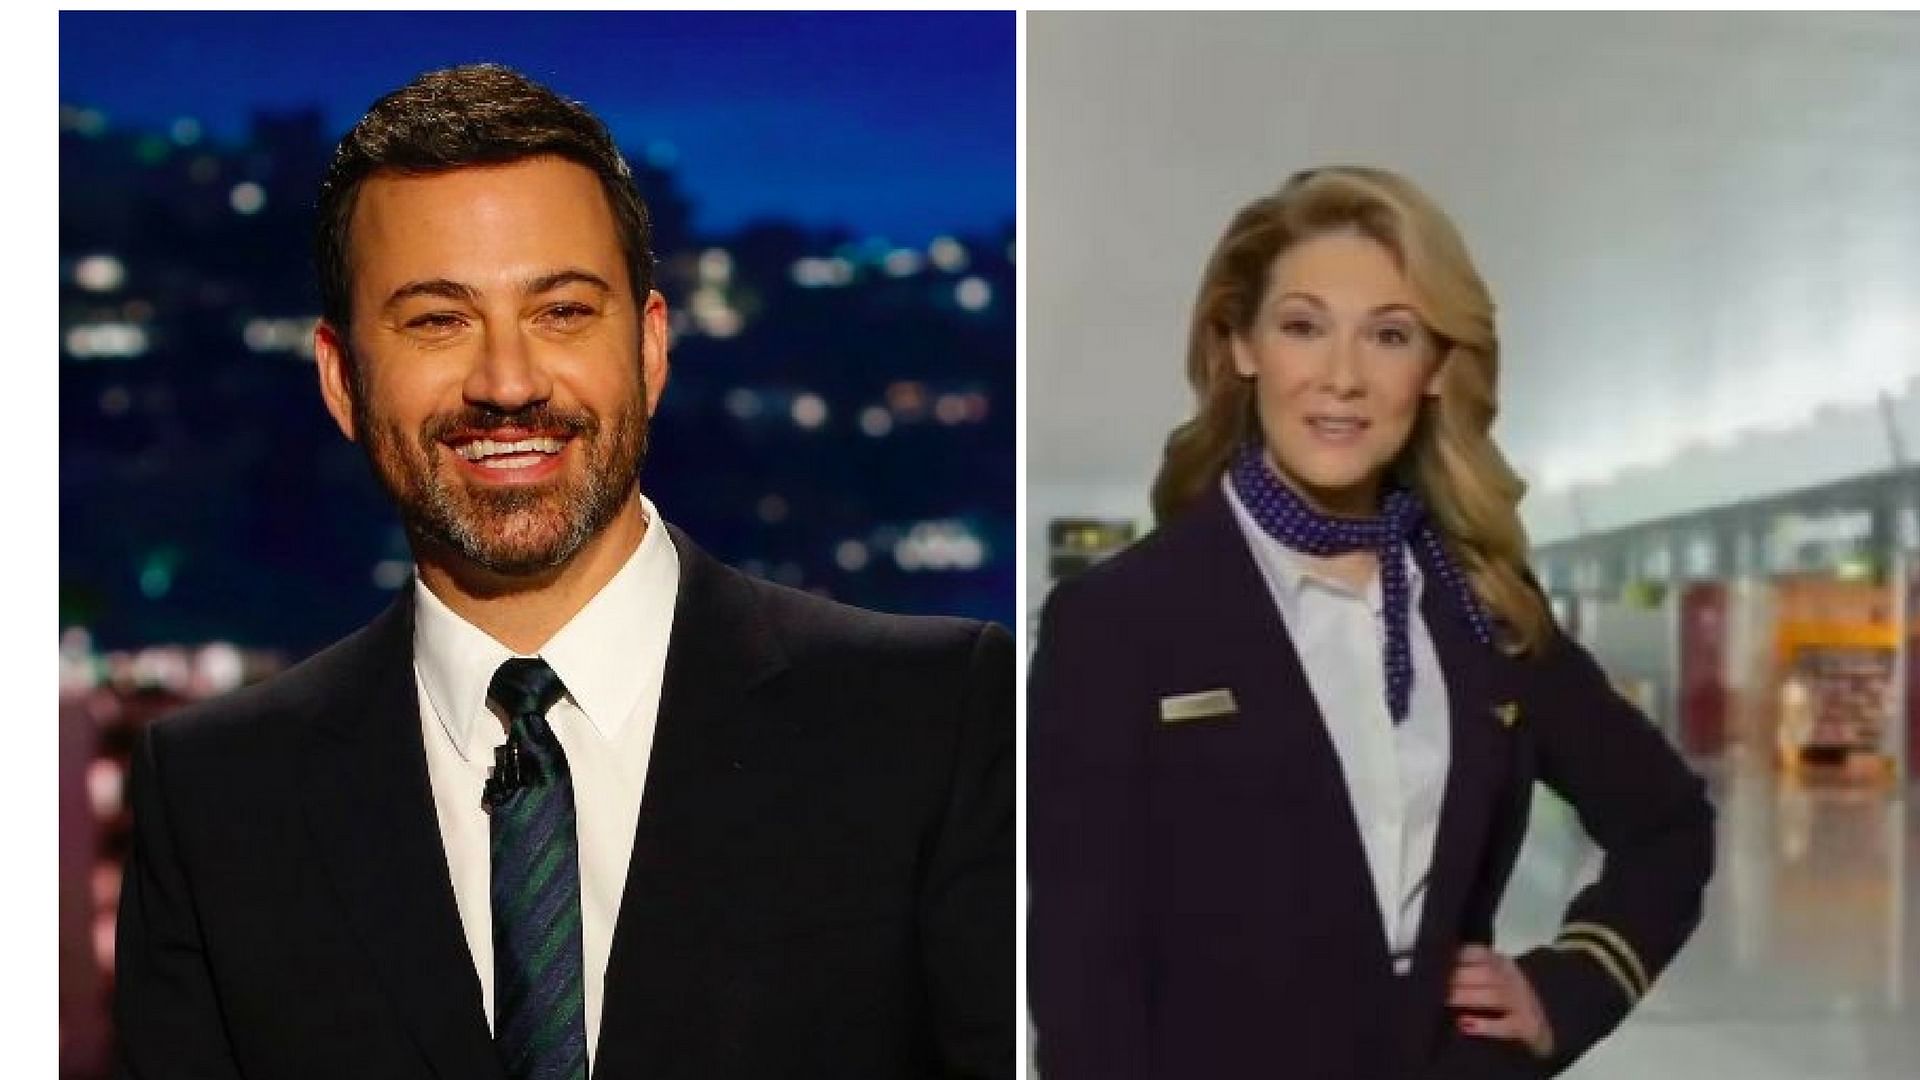 Jimmy Kimmel and (left) a still from the spoof ad. (Photo Courtesy: <a href="http://https//www.youtube.com/watch?v=4muxxItbGvo">YouTube</a> Screenshot)